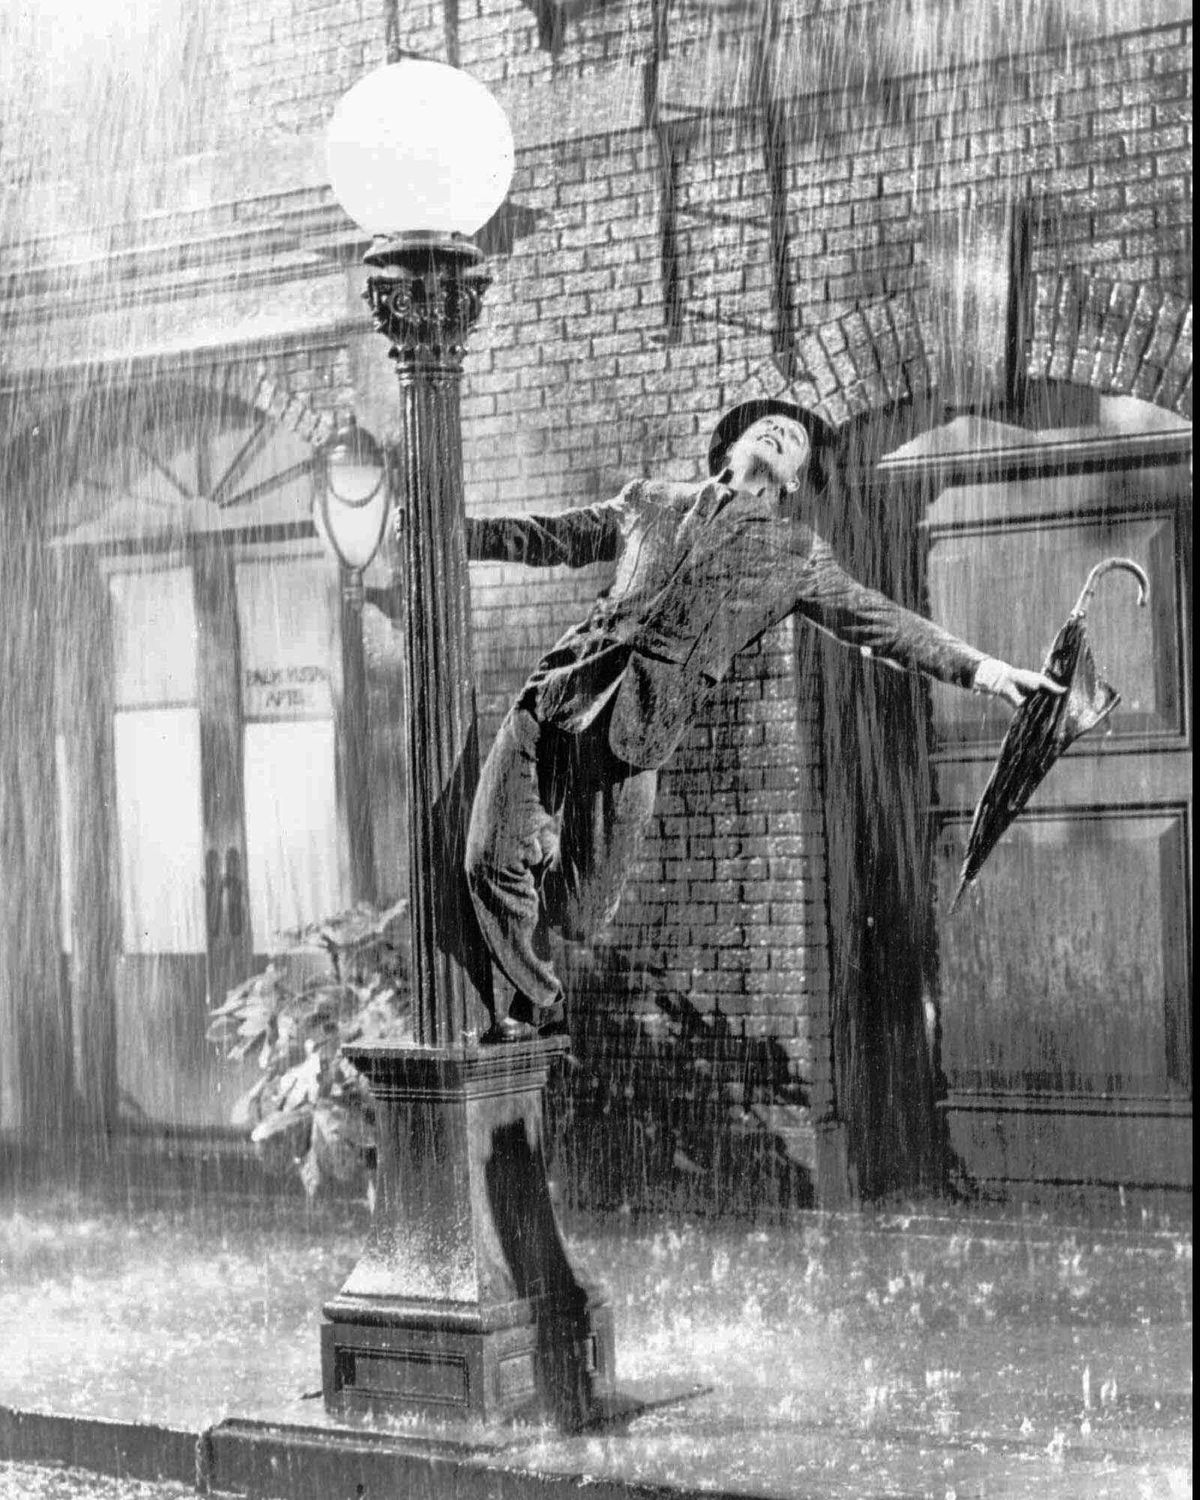 Gene Kelly performs in the 1952 film “Singin’ in the Rain,” one of the best movies about making movies. (File / Associated Press)